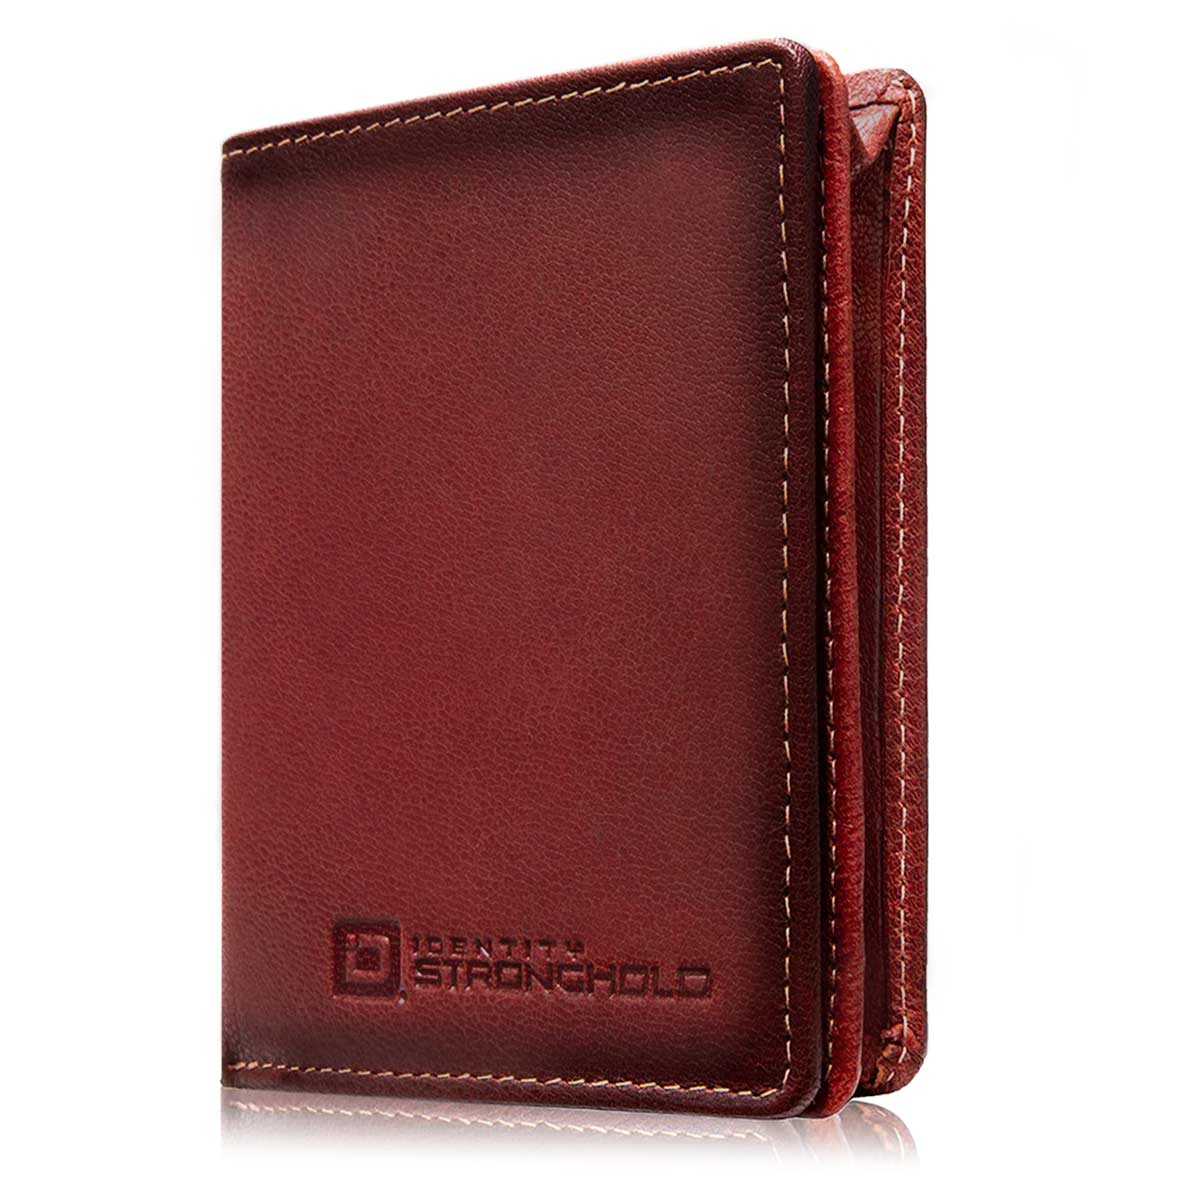 2023 Classic Style Wallet Genuine Leather Wallest Male Purse Card Holder  High Quality Wallet for Boyfriend Husband Father - AliExpress